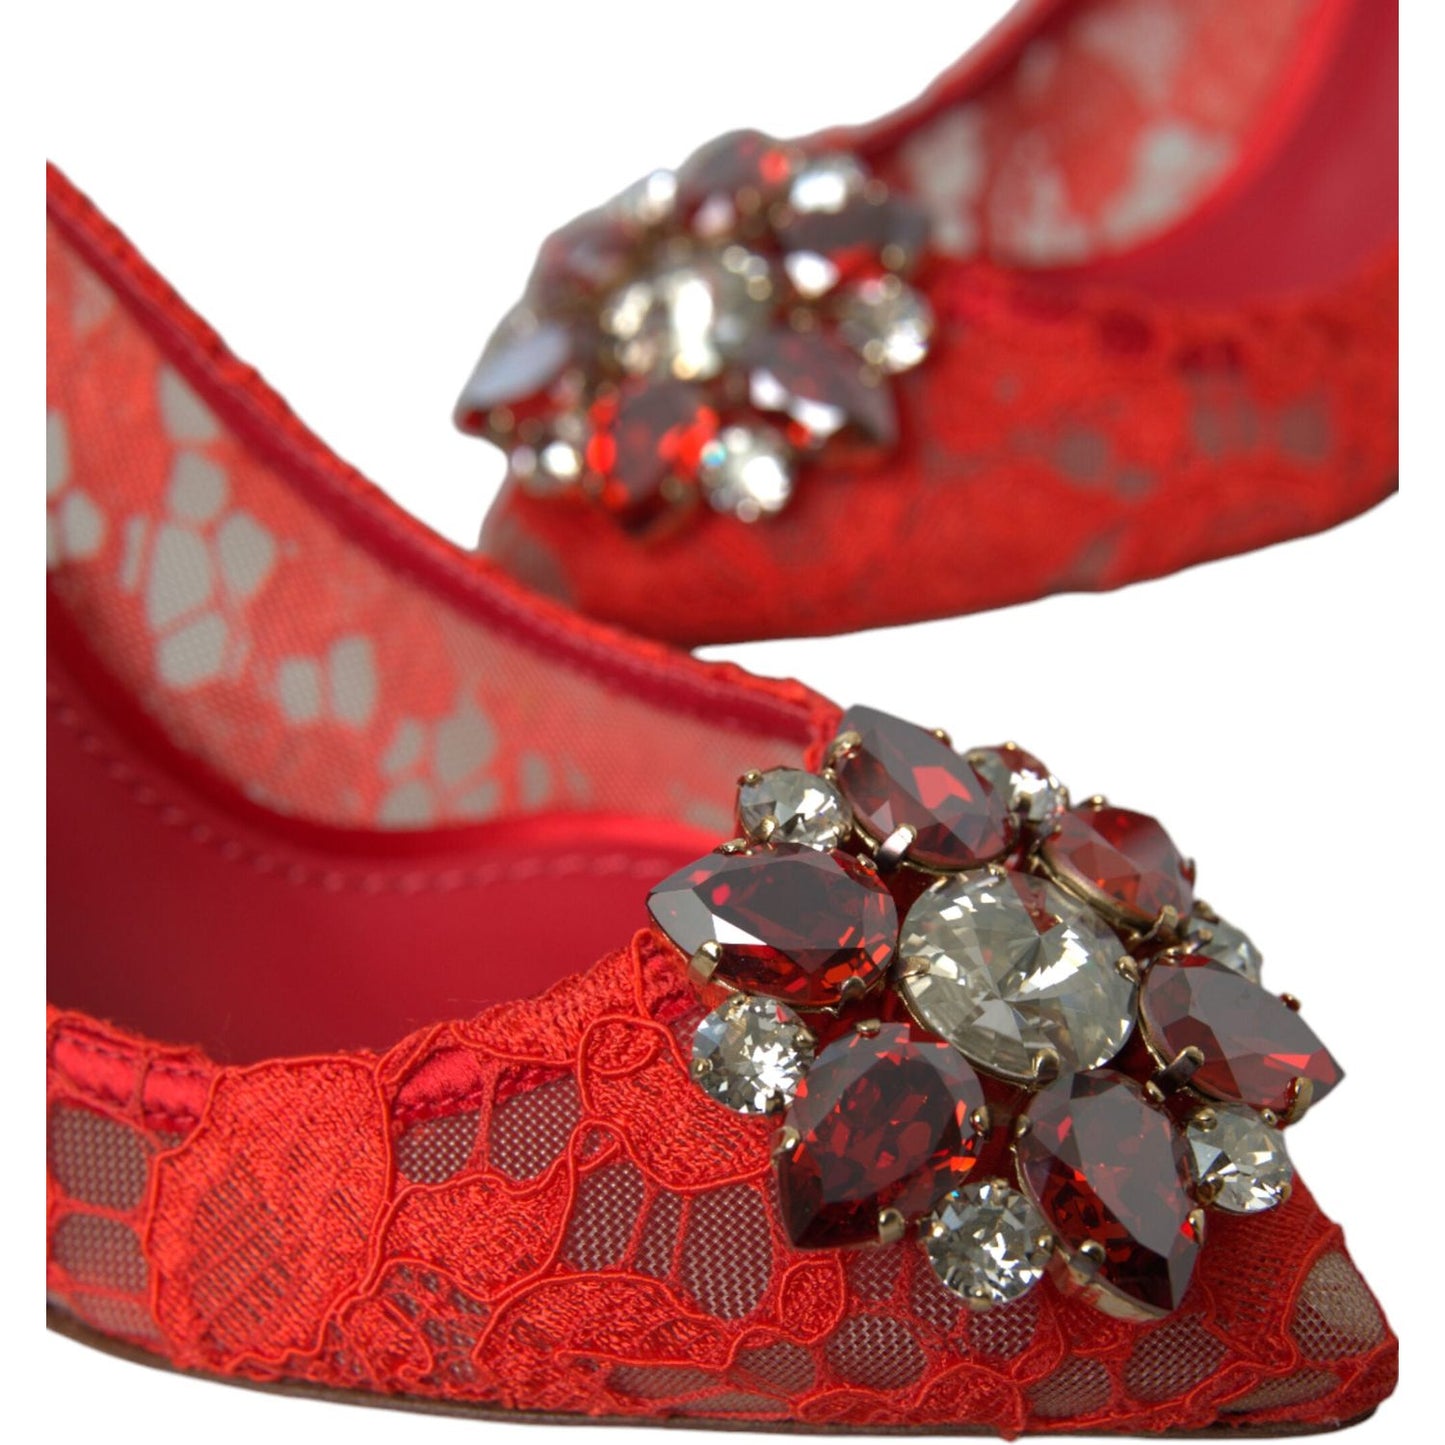 Dolce & Gabbana Exquisite Crystal-Embellished Red Lace Heels red-taormina-lace-crystal-heels-pumps-shoes-1 465A9199-bg-scaled-4d9e843a-d4c.jpg